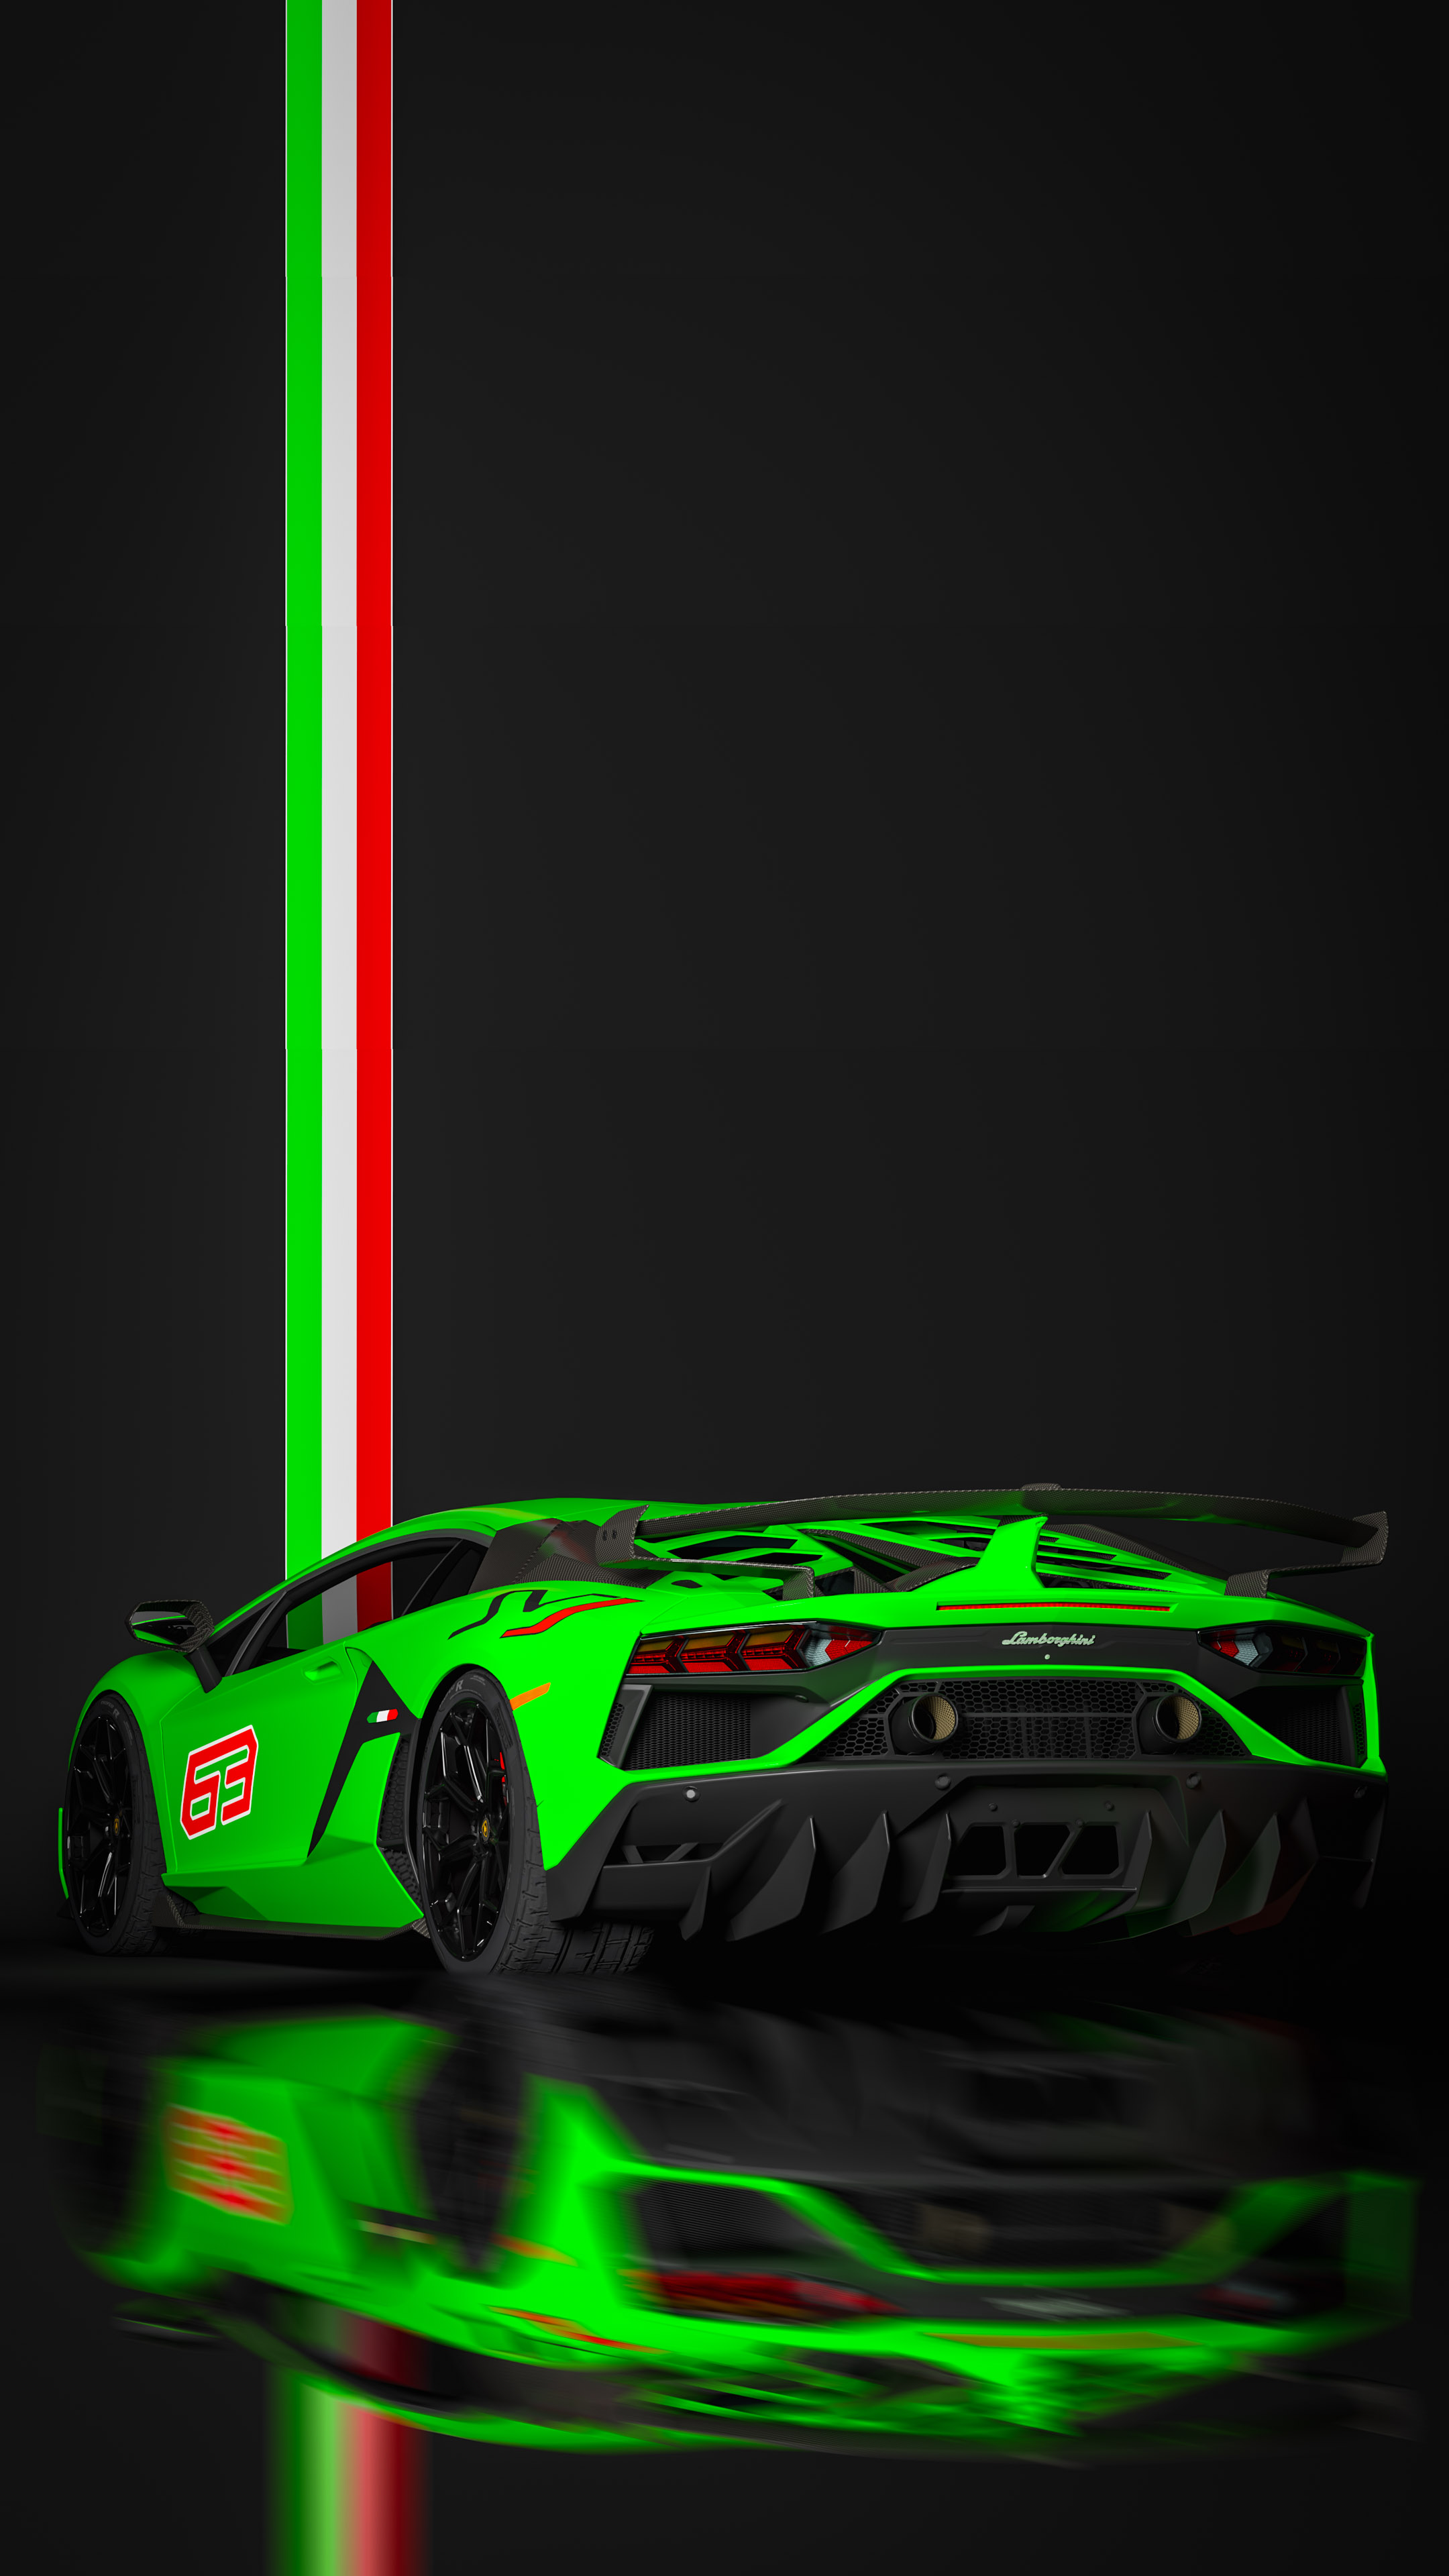 Elevate your iPhone aesthetics with the cool supercar wallpaper, featuring the Lamborghini Aventador SVJ in striking HD resolution for a visually stunning experience.